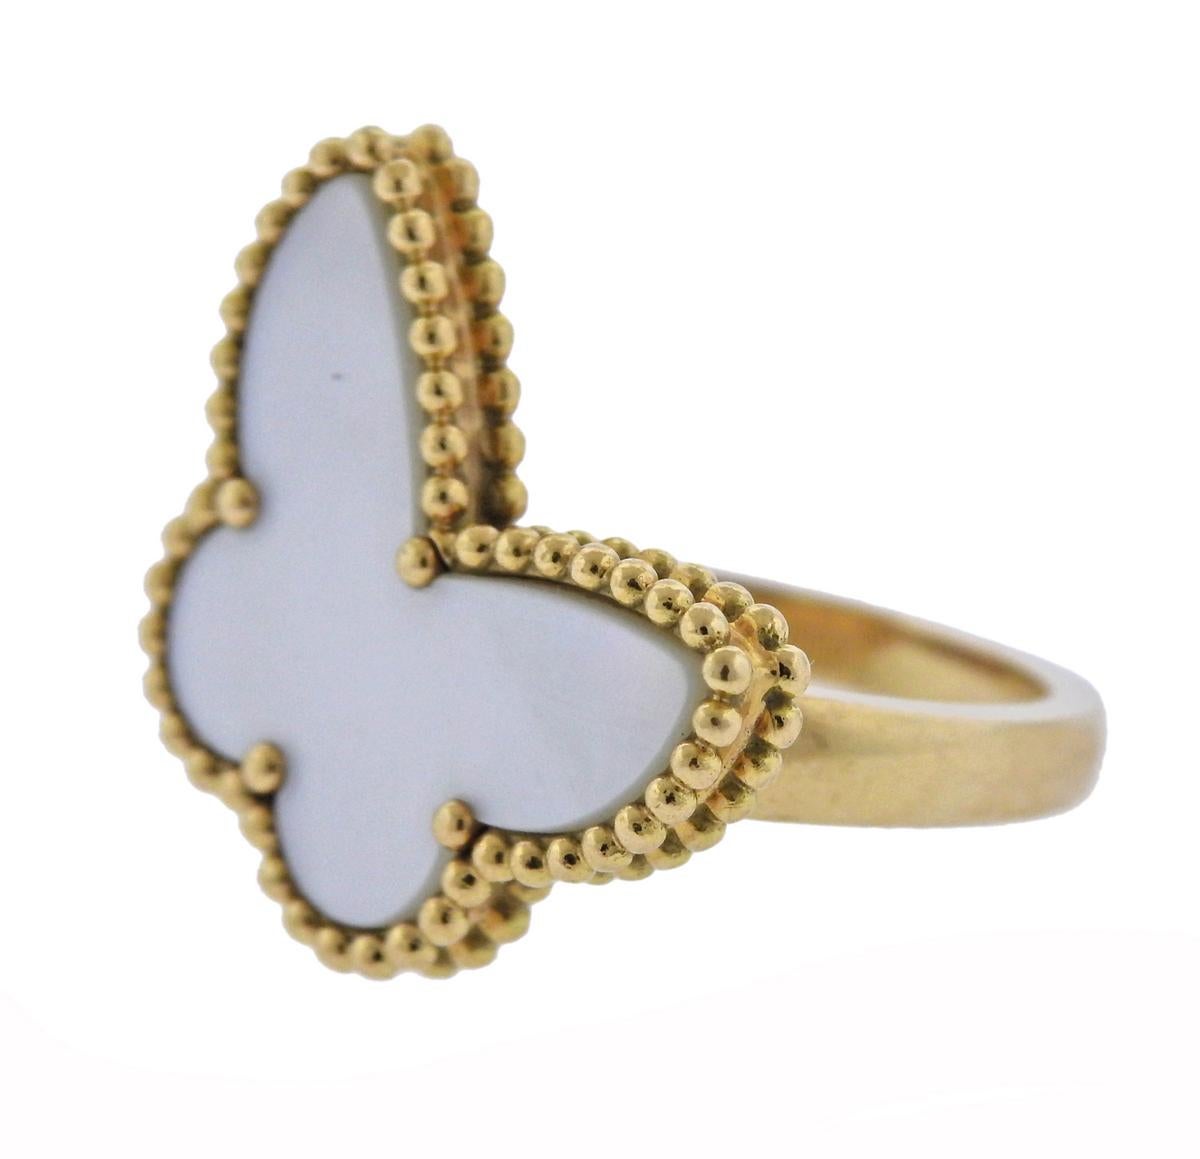  18k yellow gold Lucky Alhambra ring, featuring butterfly motif, crafted by Van Cleef & Arpels, set with mother of pearl. Retail $3700. Ring size - 5.25, ring to - 22mm x 16mm, weighs 9.6 grams. Marked: VCA, 750, BL 201***, 49.